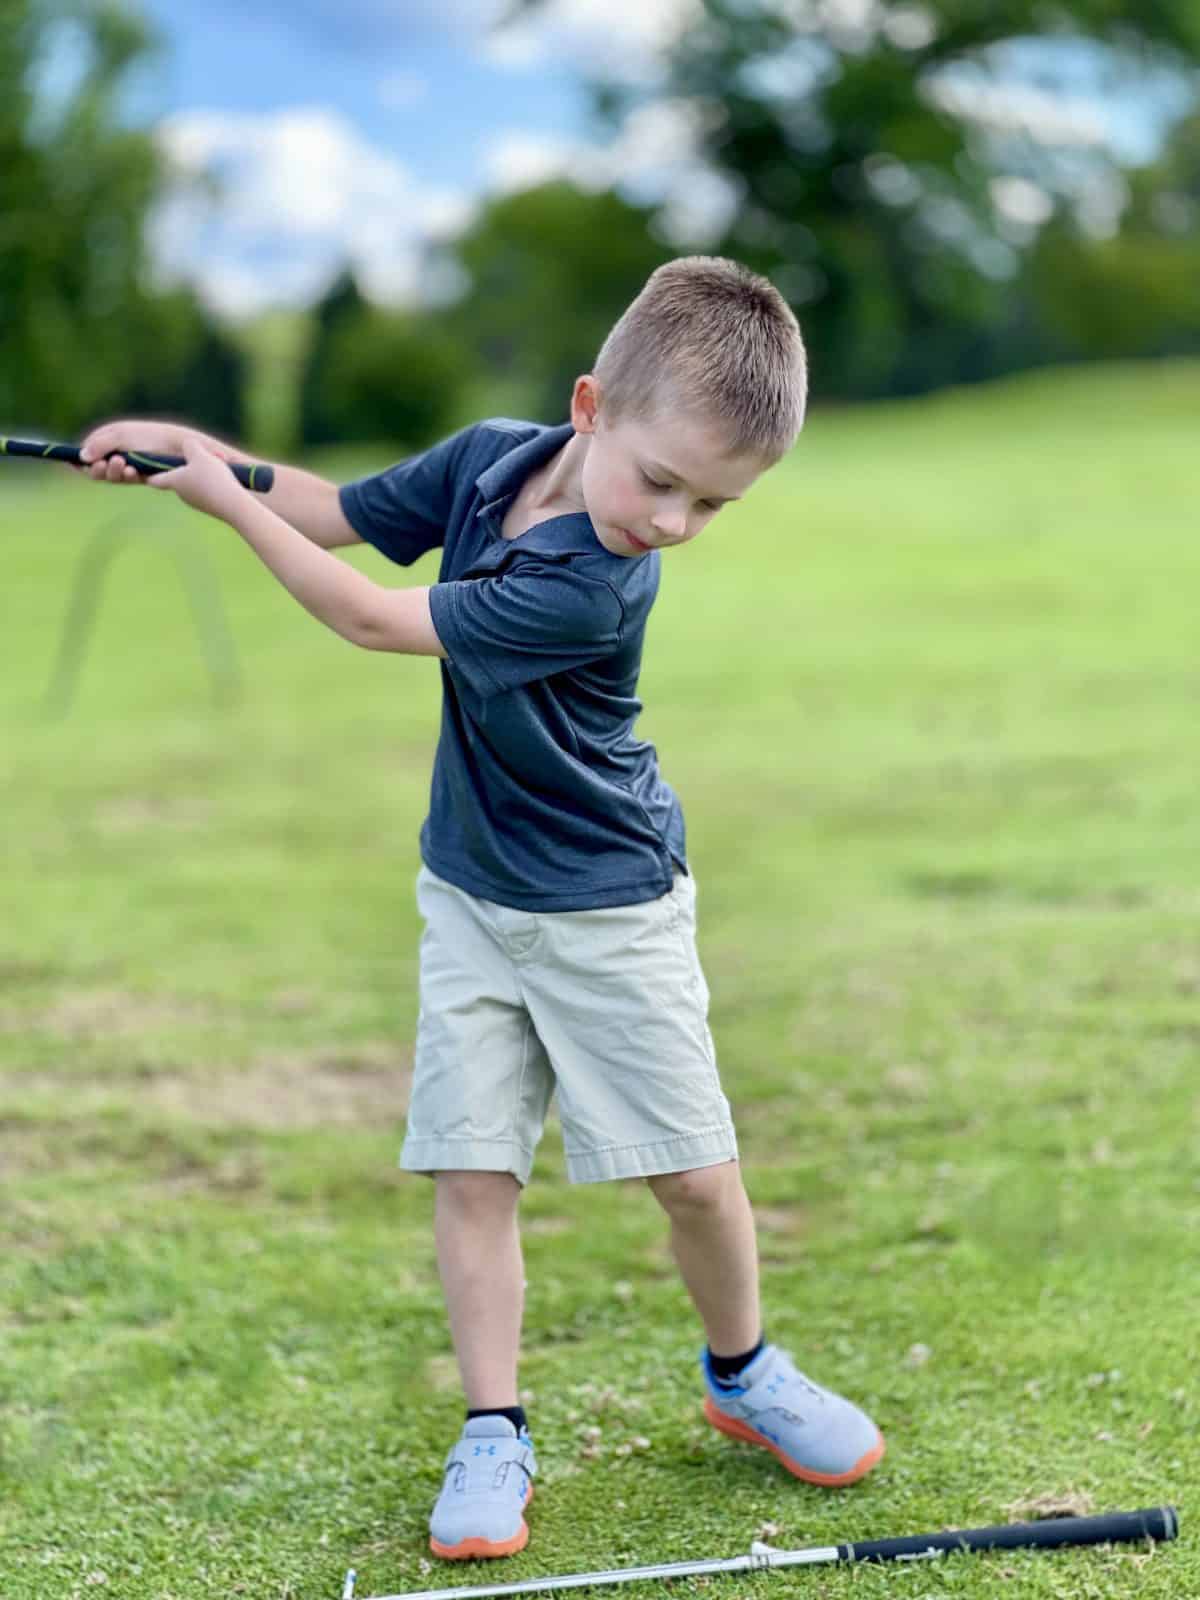 Golf Lessons - Practice range with kids